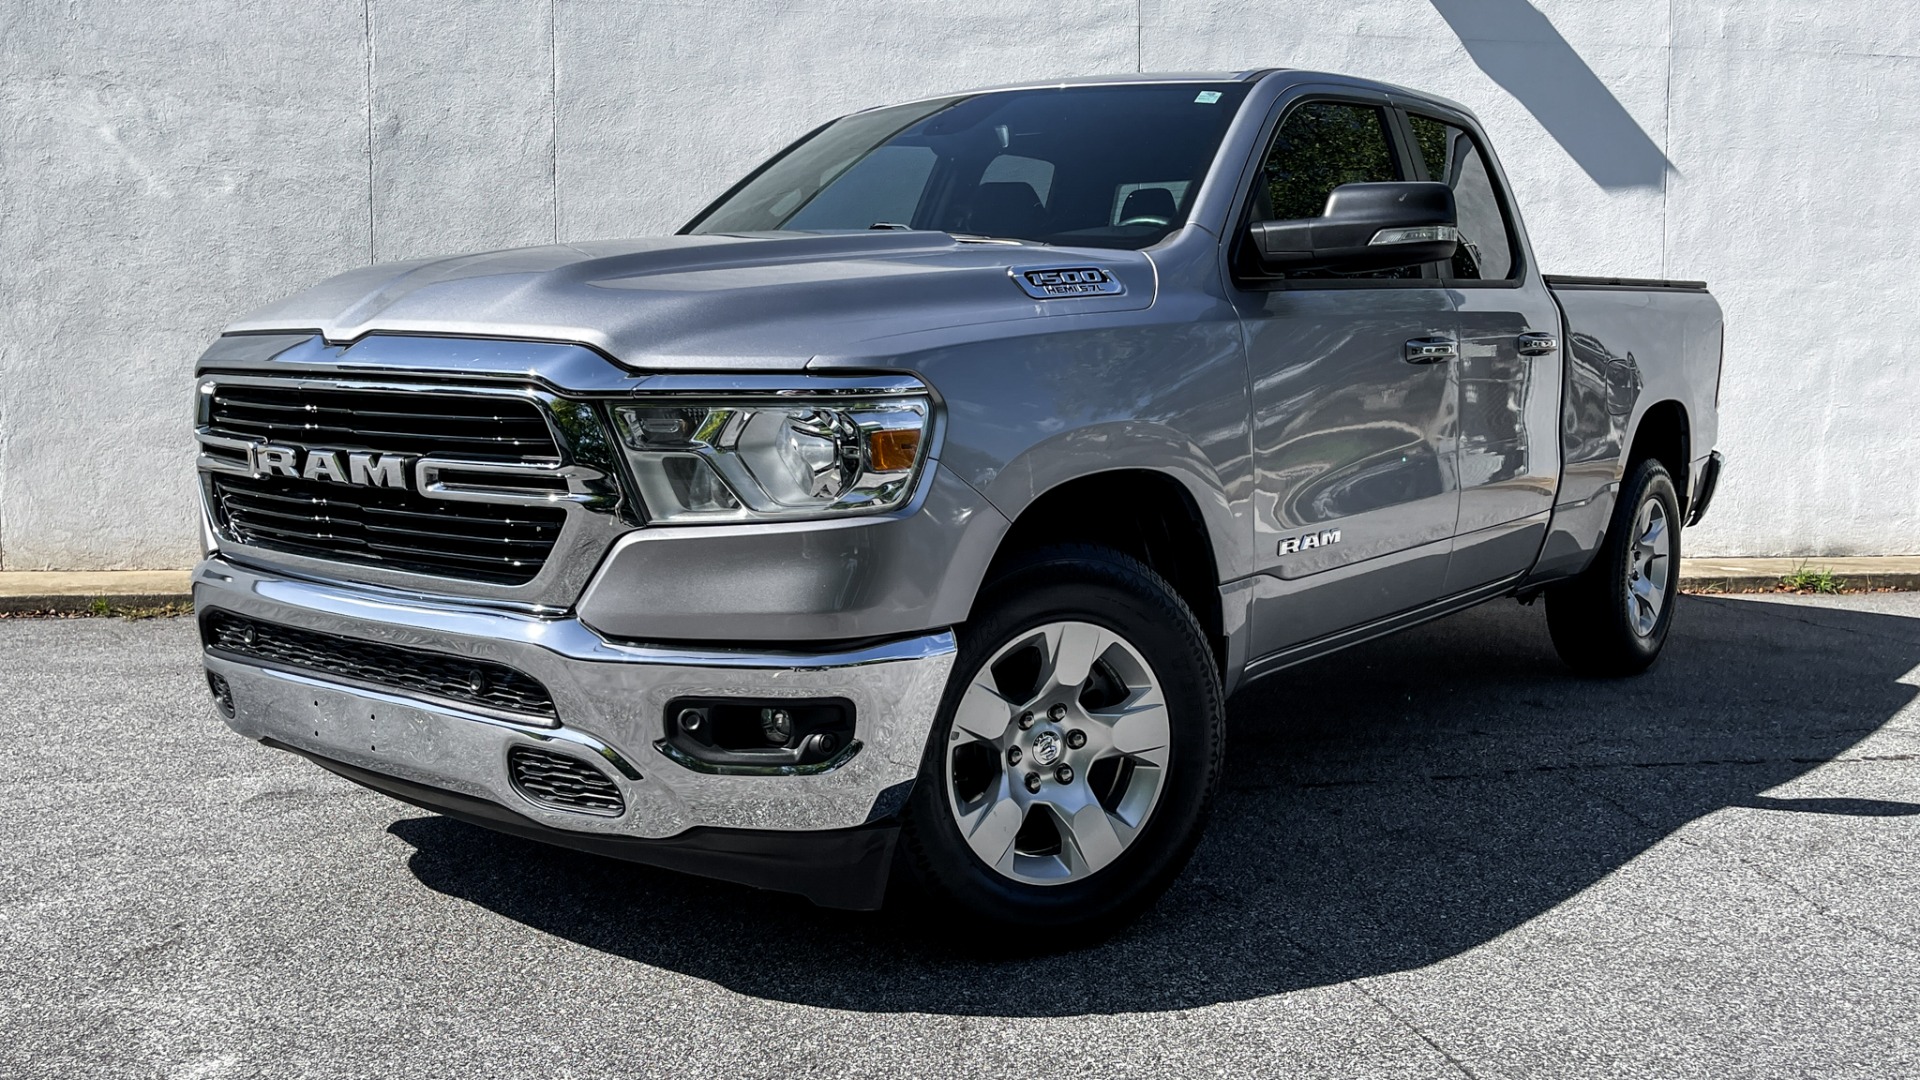 Used 2019 Ram 1500 Big Horn / 4X4 / DOUBLE CAB / 5.7L HEMI / LVL 2 EQUIPMENT / CLOTH for sale $33,995 at Formula Imports in Charlotte NC 28227 1